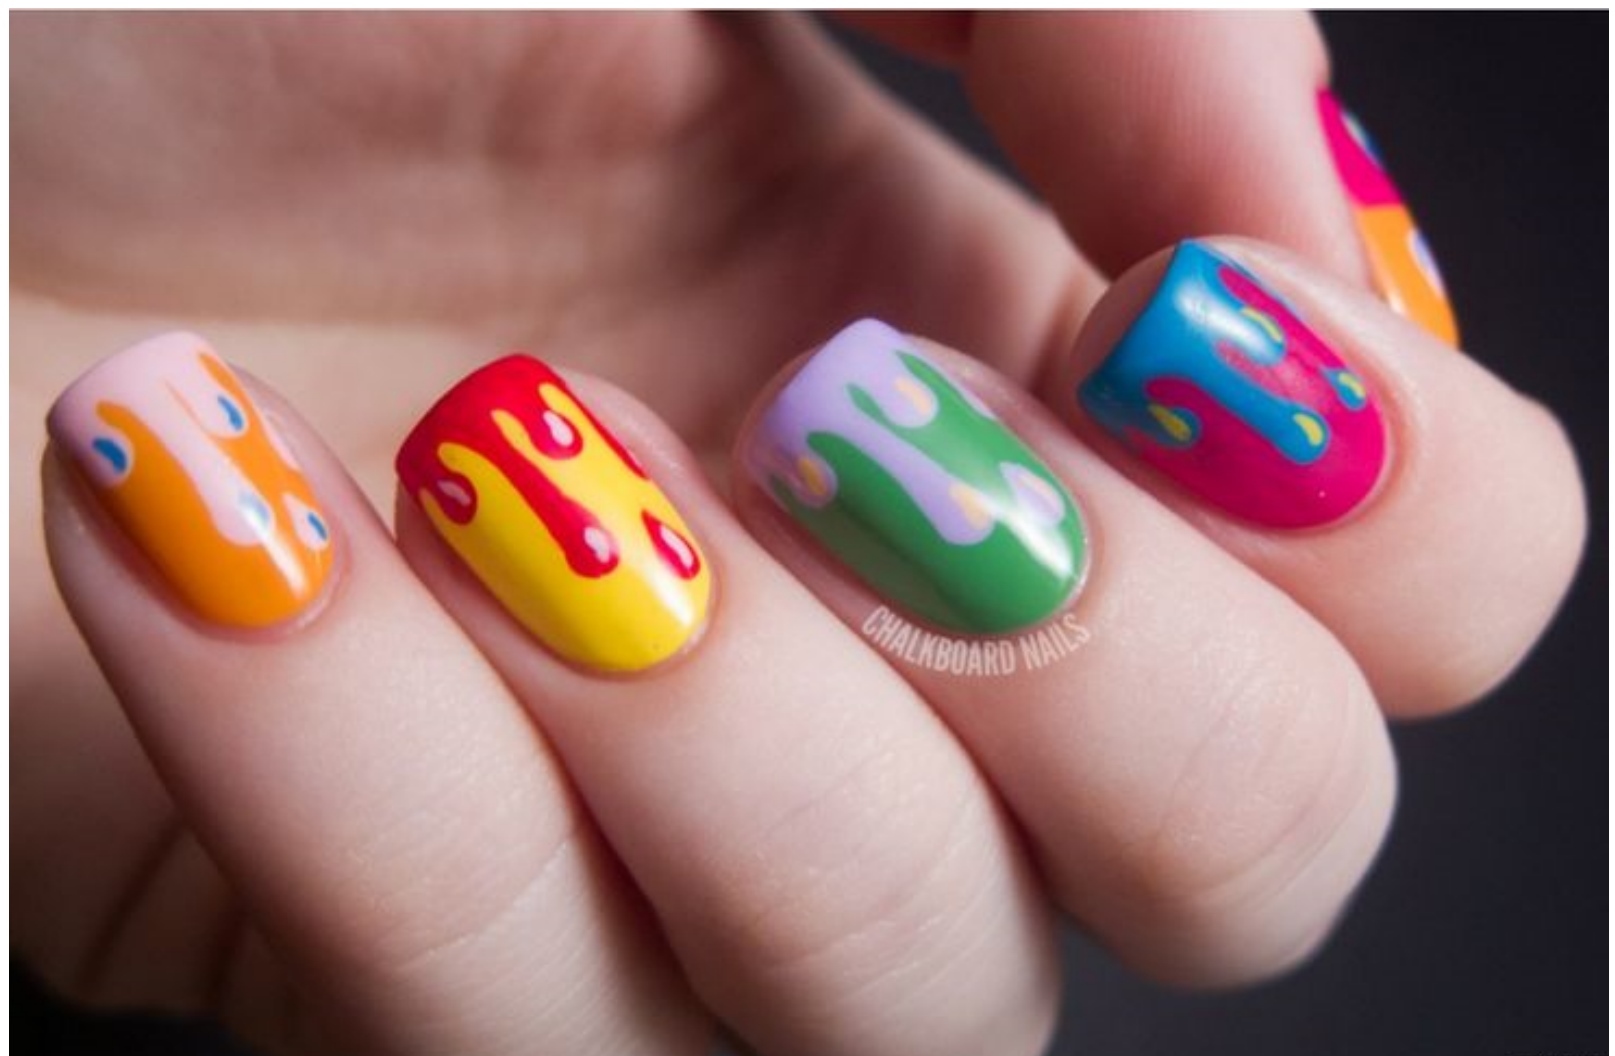 10. Neon Nail Colors for a Bold Teenage Statement - wide 6